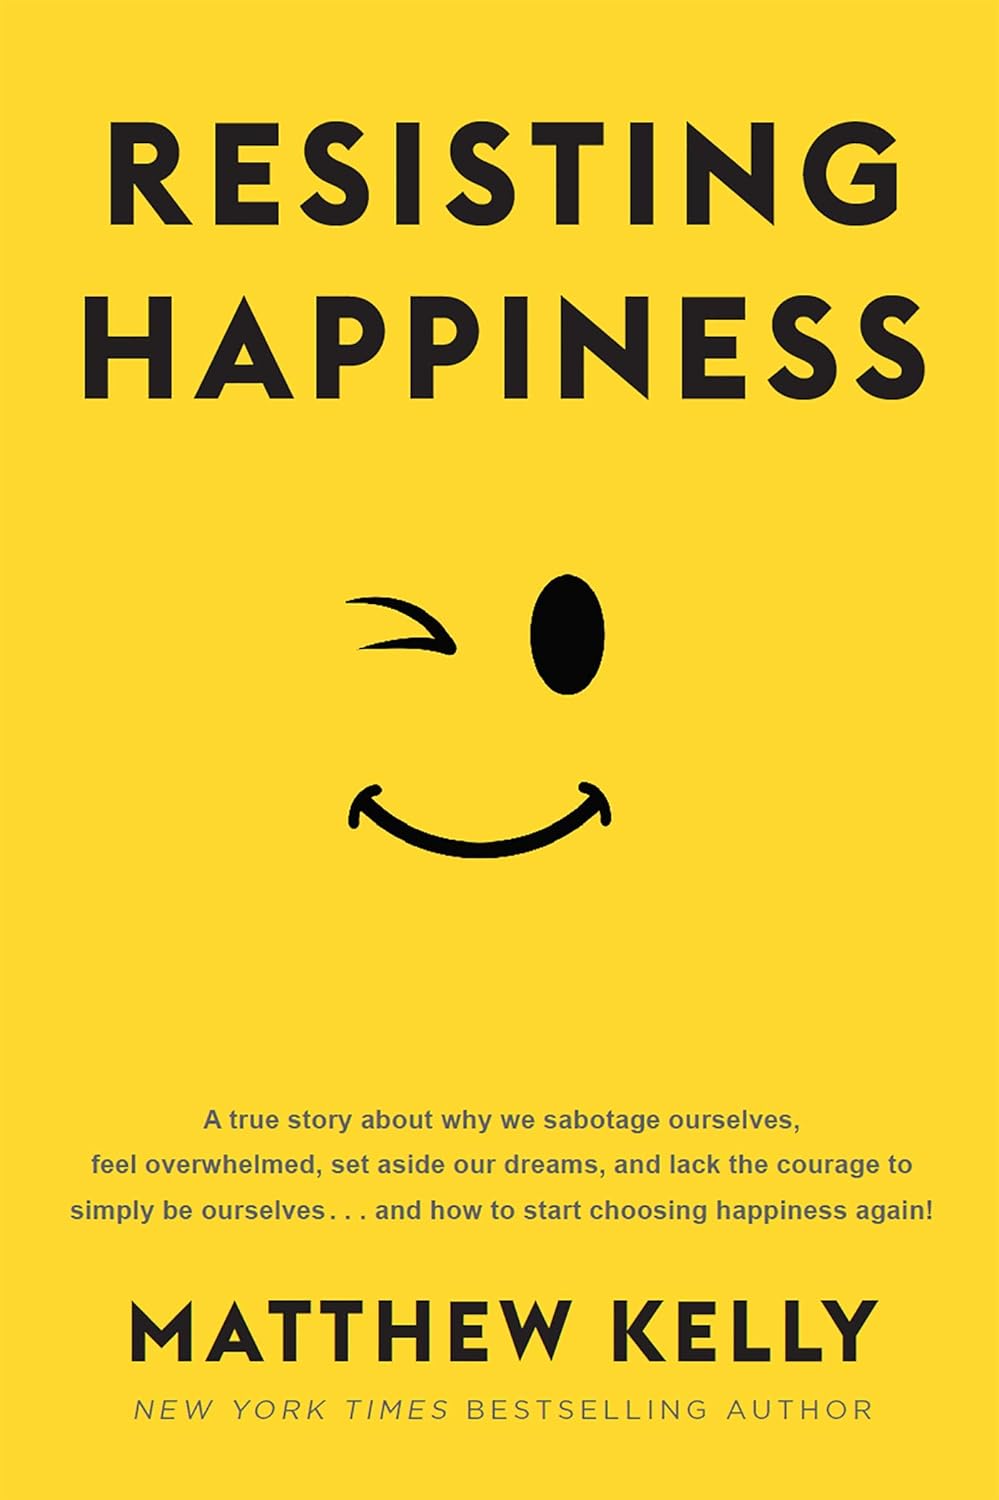 Resisting Happiness Paperback by Matthew Kelly (Author)